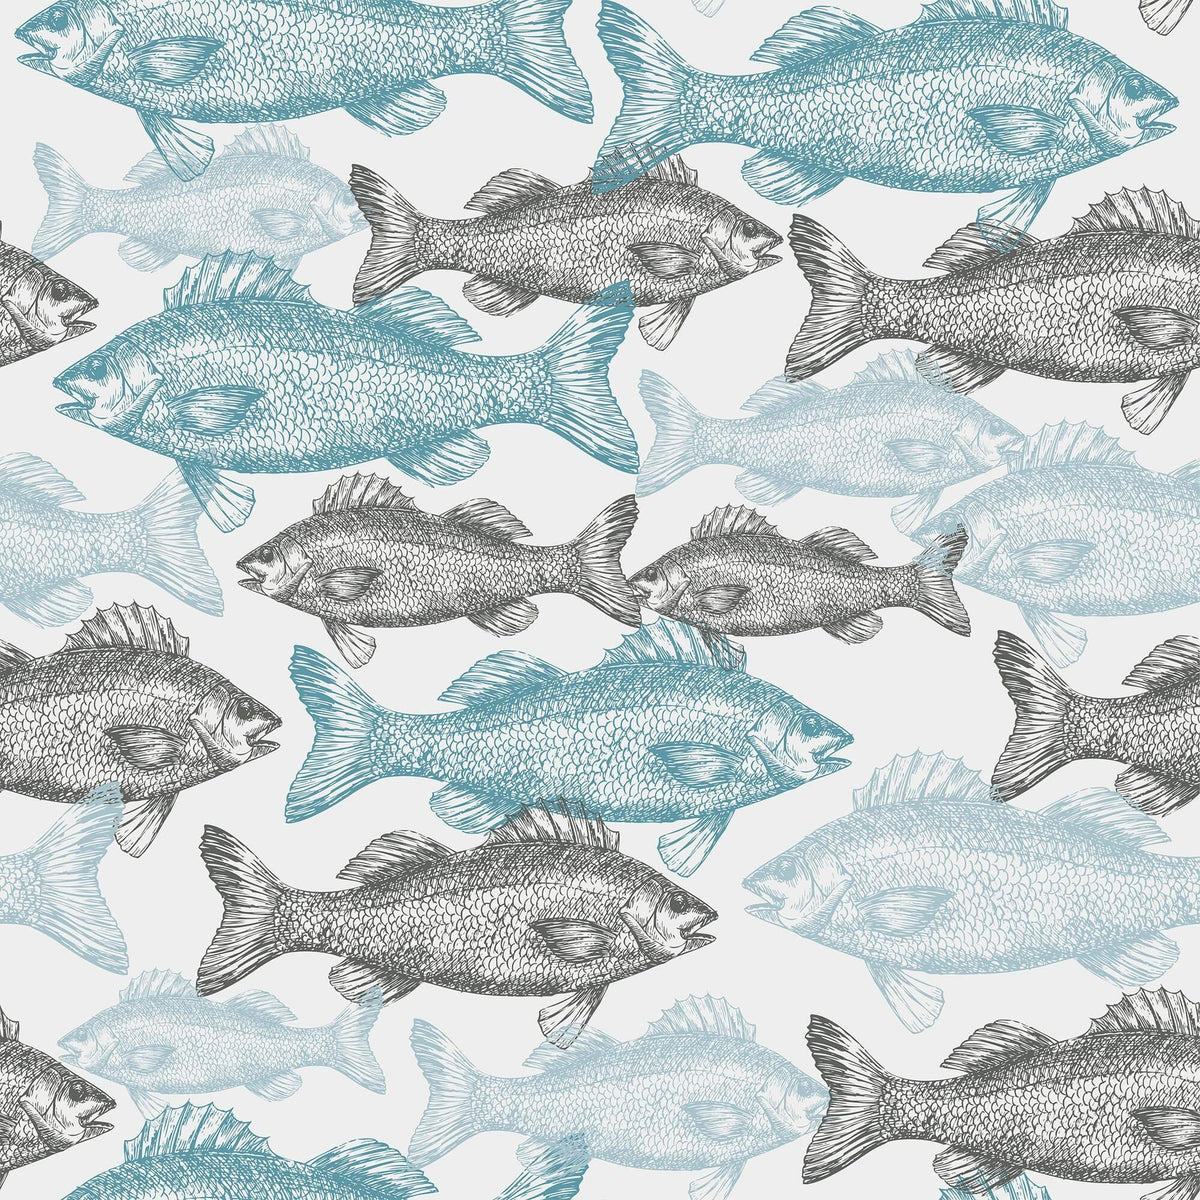 Blue Fish Nautical Peel and Stick Removable Wallpaper 0378 - Sample 11in x 24in (28x61cm)